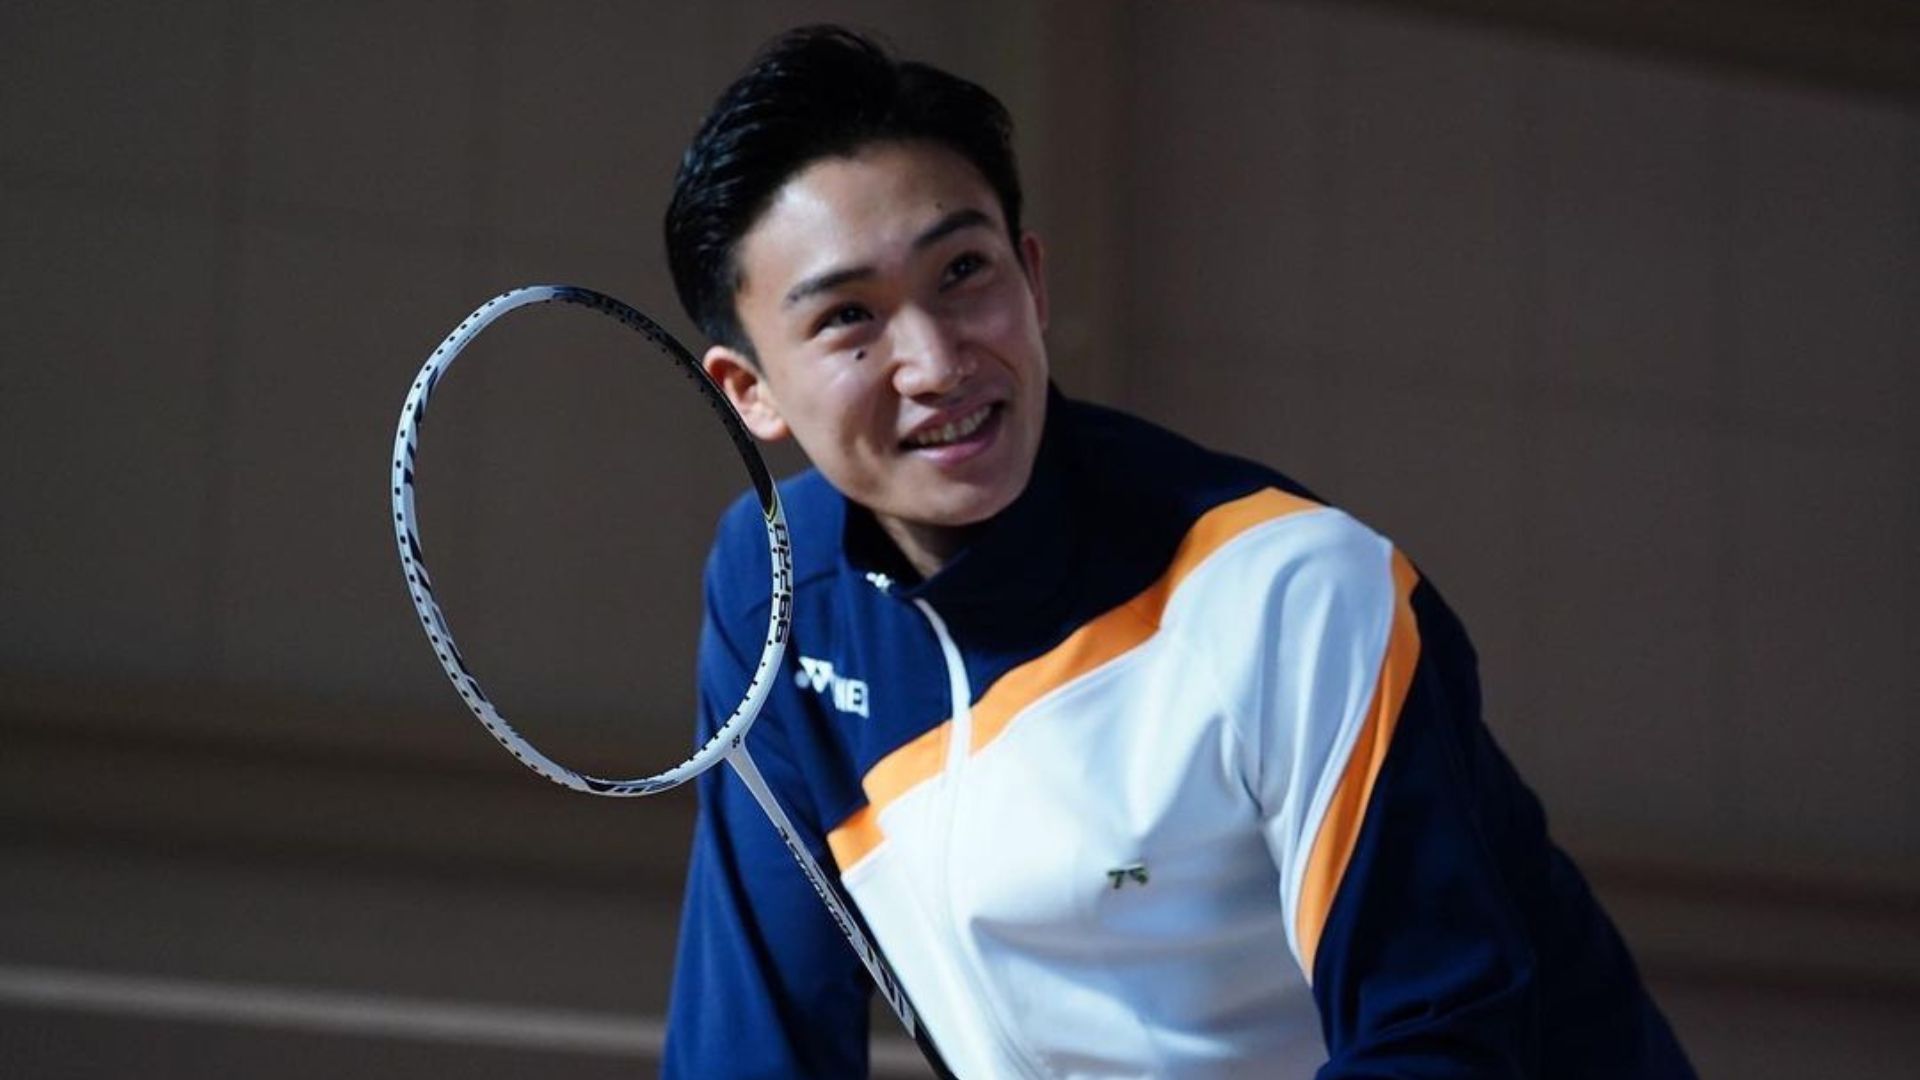 Kento Momota in a file photo (Image Credits - Instagram)